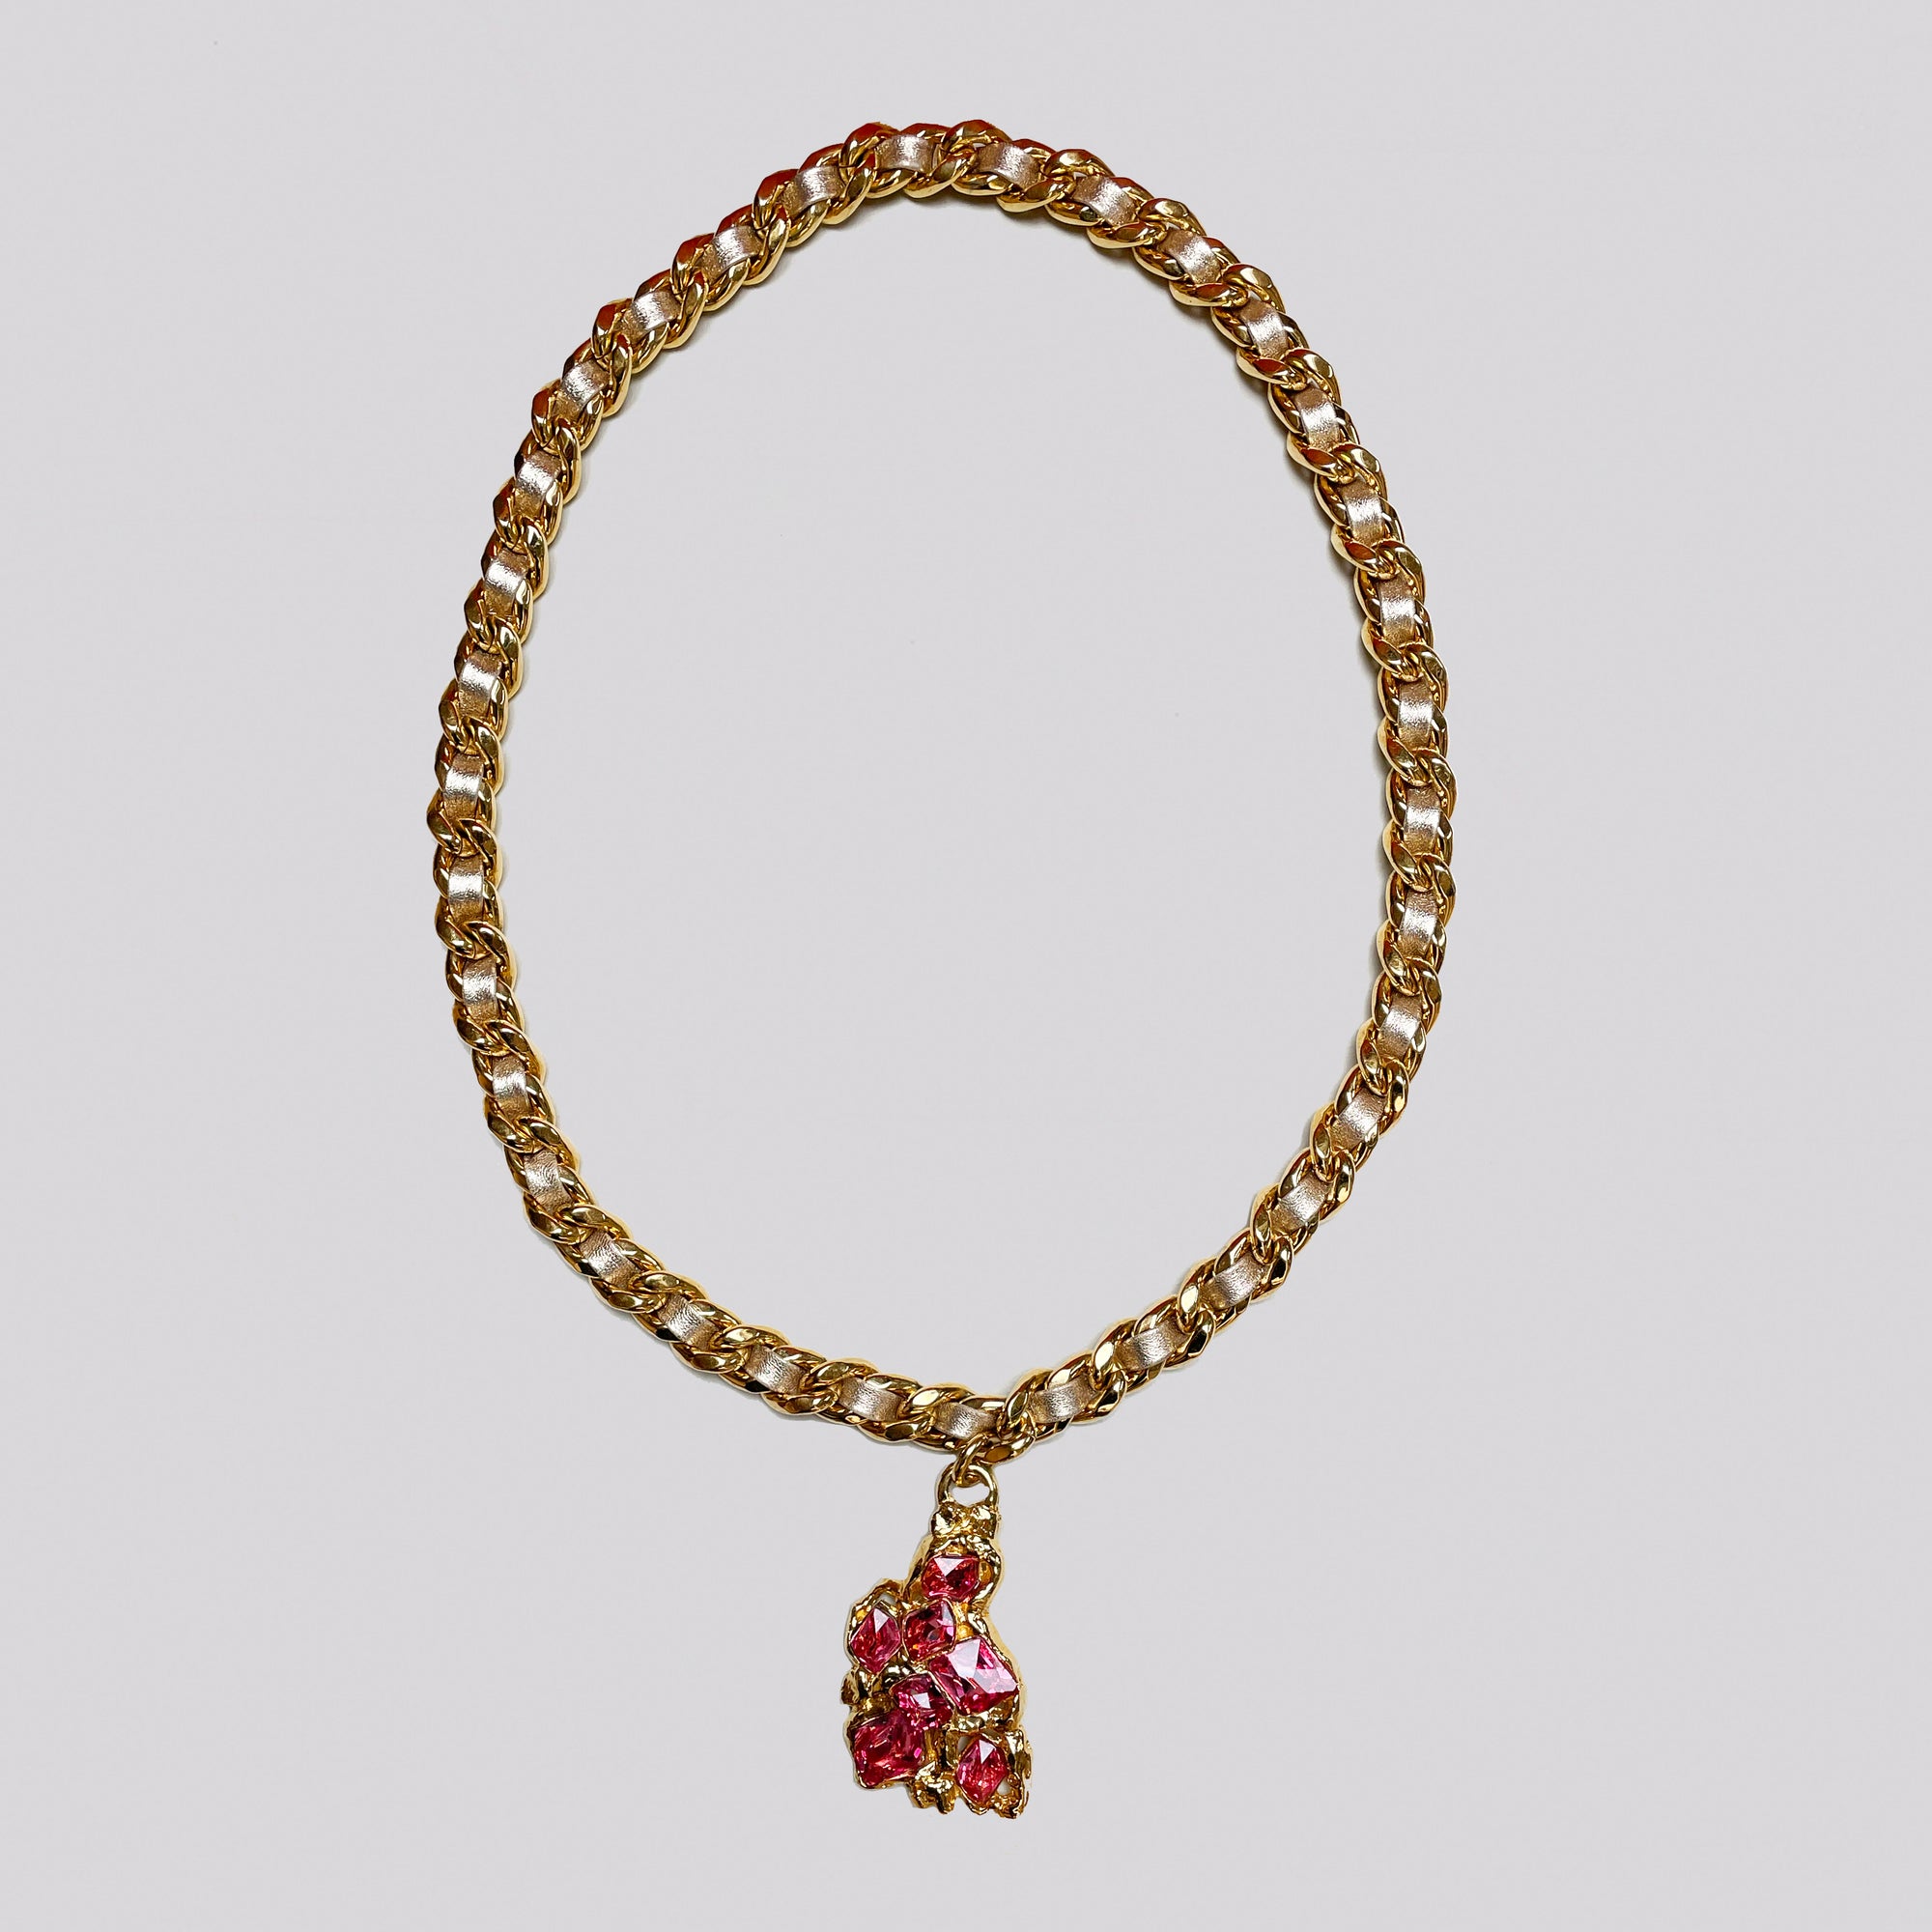 Vintage Gold Chain Necklace with Pink Stones